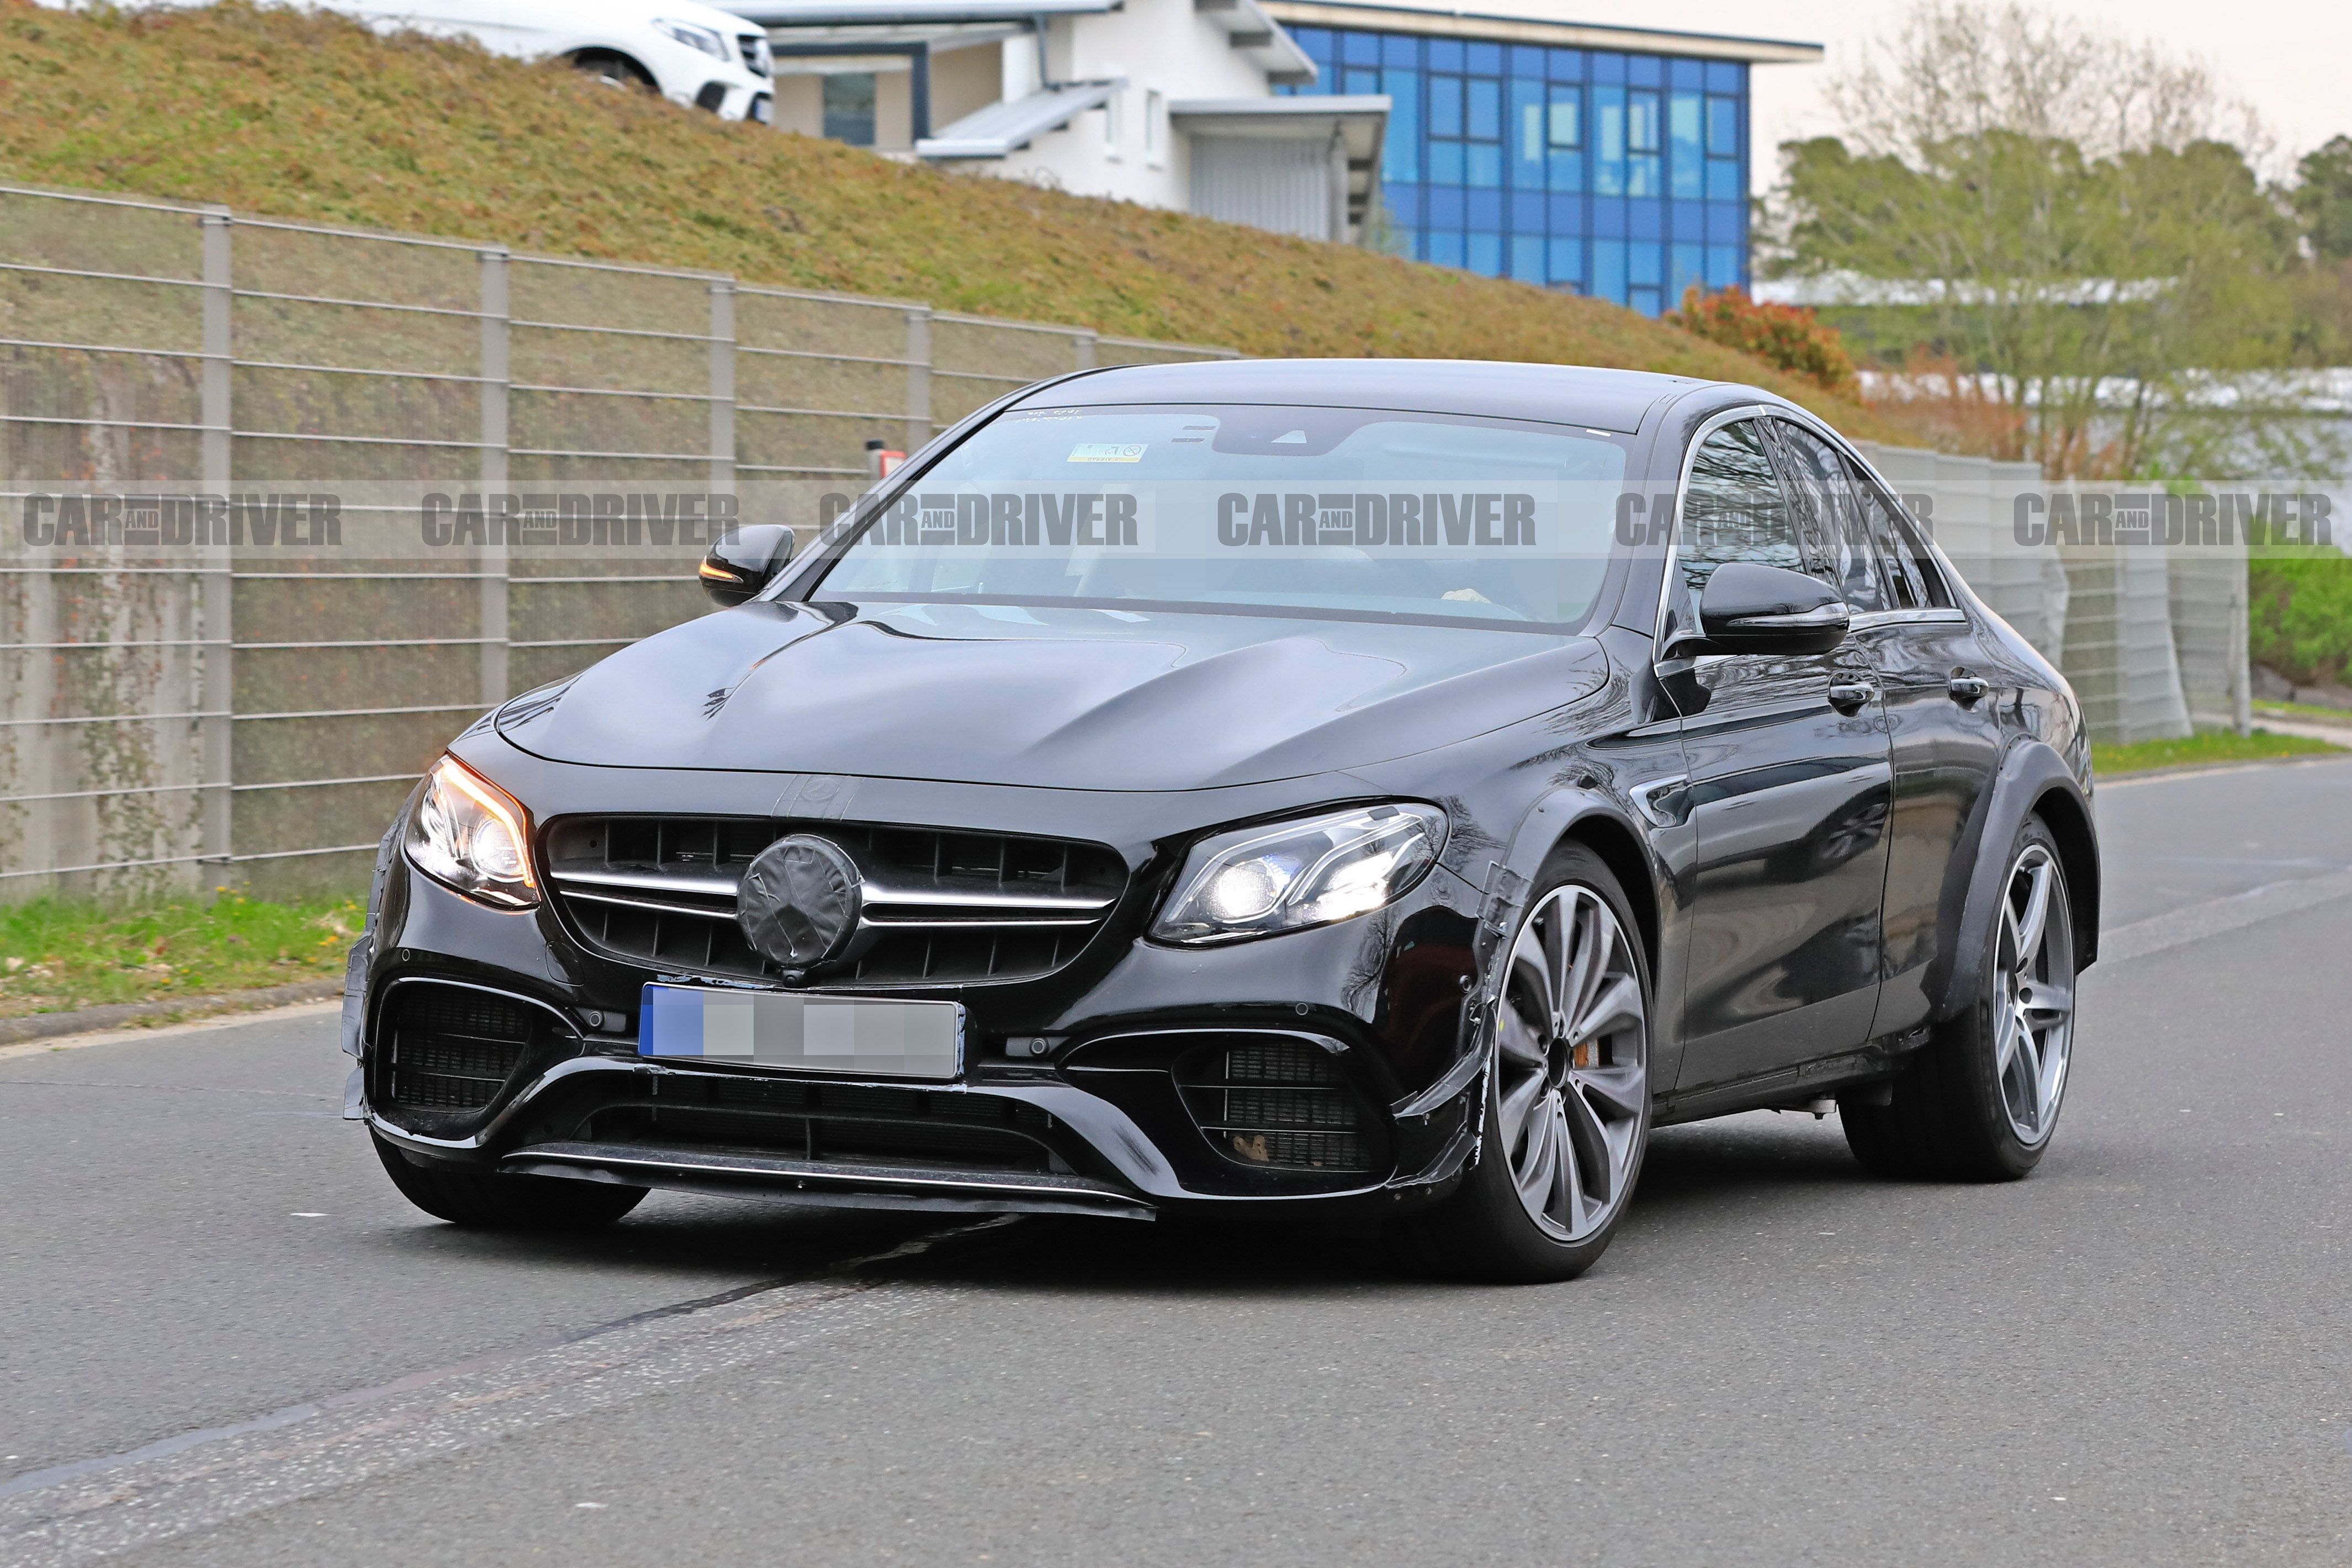 2025 Mercedes GLA Test Mule Spied For The First Time, Can't Hide